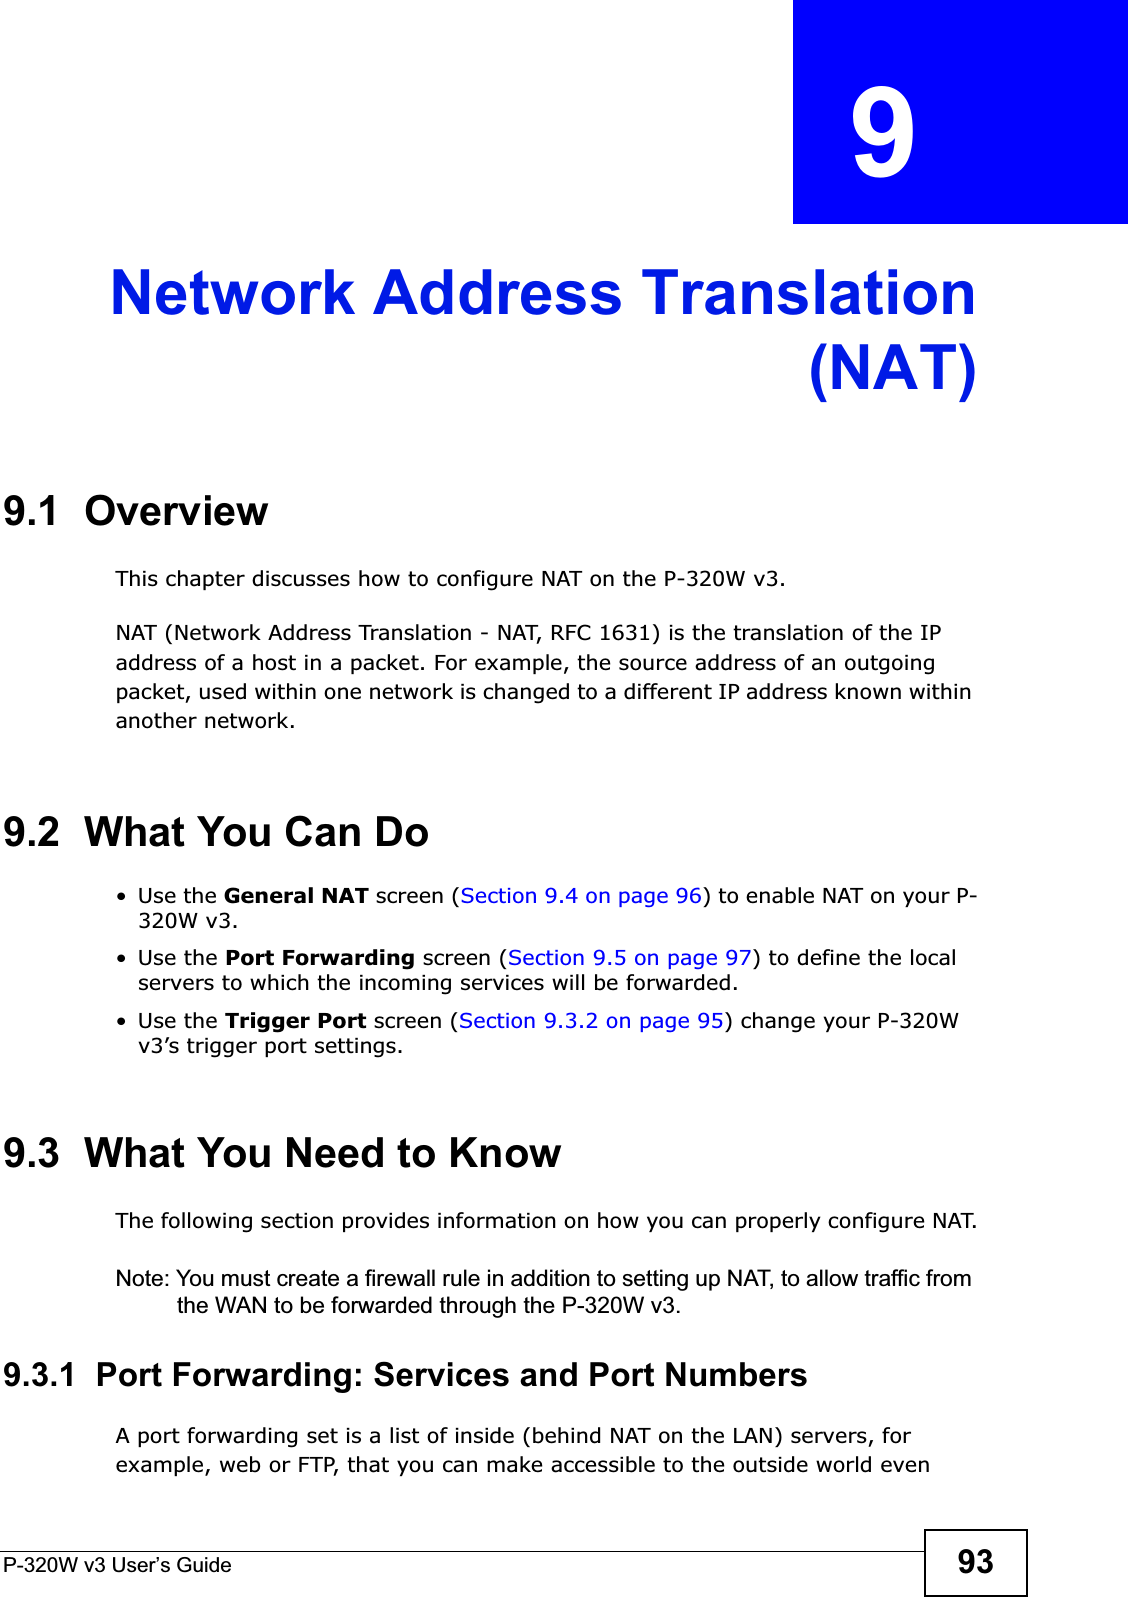 P-320W v3 User’s Guide 93CHAPTER  9 Network Address Translation(NAT)9.1  OverviewThis chapter discusses how to configure NAT on the P-320W v3.NAT (Network Address Translation - NAT, RFC 1631) is the translation of the IP address of a host in a packet. For example, the source address of an outgoing packet, used within one network is changed to a different IP address known within another network.9.2  What You Can Do•Use the General NAT screen (Section 9.4 on page 96) to enable NAT on your P-320W v3.•Use the Port Forwarding screen (Section 9.5 on page 97) to define the local servers to which the incoming services will be forwarded.•Use the Trigger Port screen (Section 9.3.2 on page 95) change your P-320W v3’s trigger port settings.9.3  What You Need to KnowThe following section provides information on how you can properly configure NAT.Note: You must create a firewall rule in addition to setting up NAT, to allow traffic from the WAN to be forwarded through the P-320W v3.9.3.1  Port Forwarding: Services and Port NumbersA port forwarding set is a list of inside (behind NAT on the LAN) servers, for example, web or FTP, that you can make accessible to the outside world even 